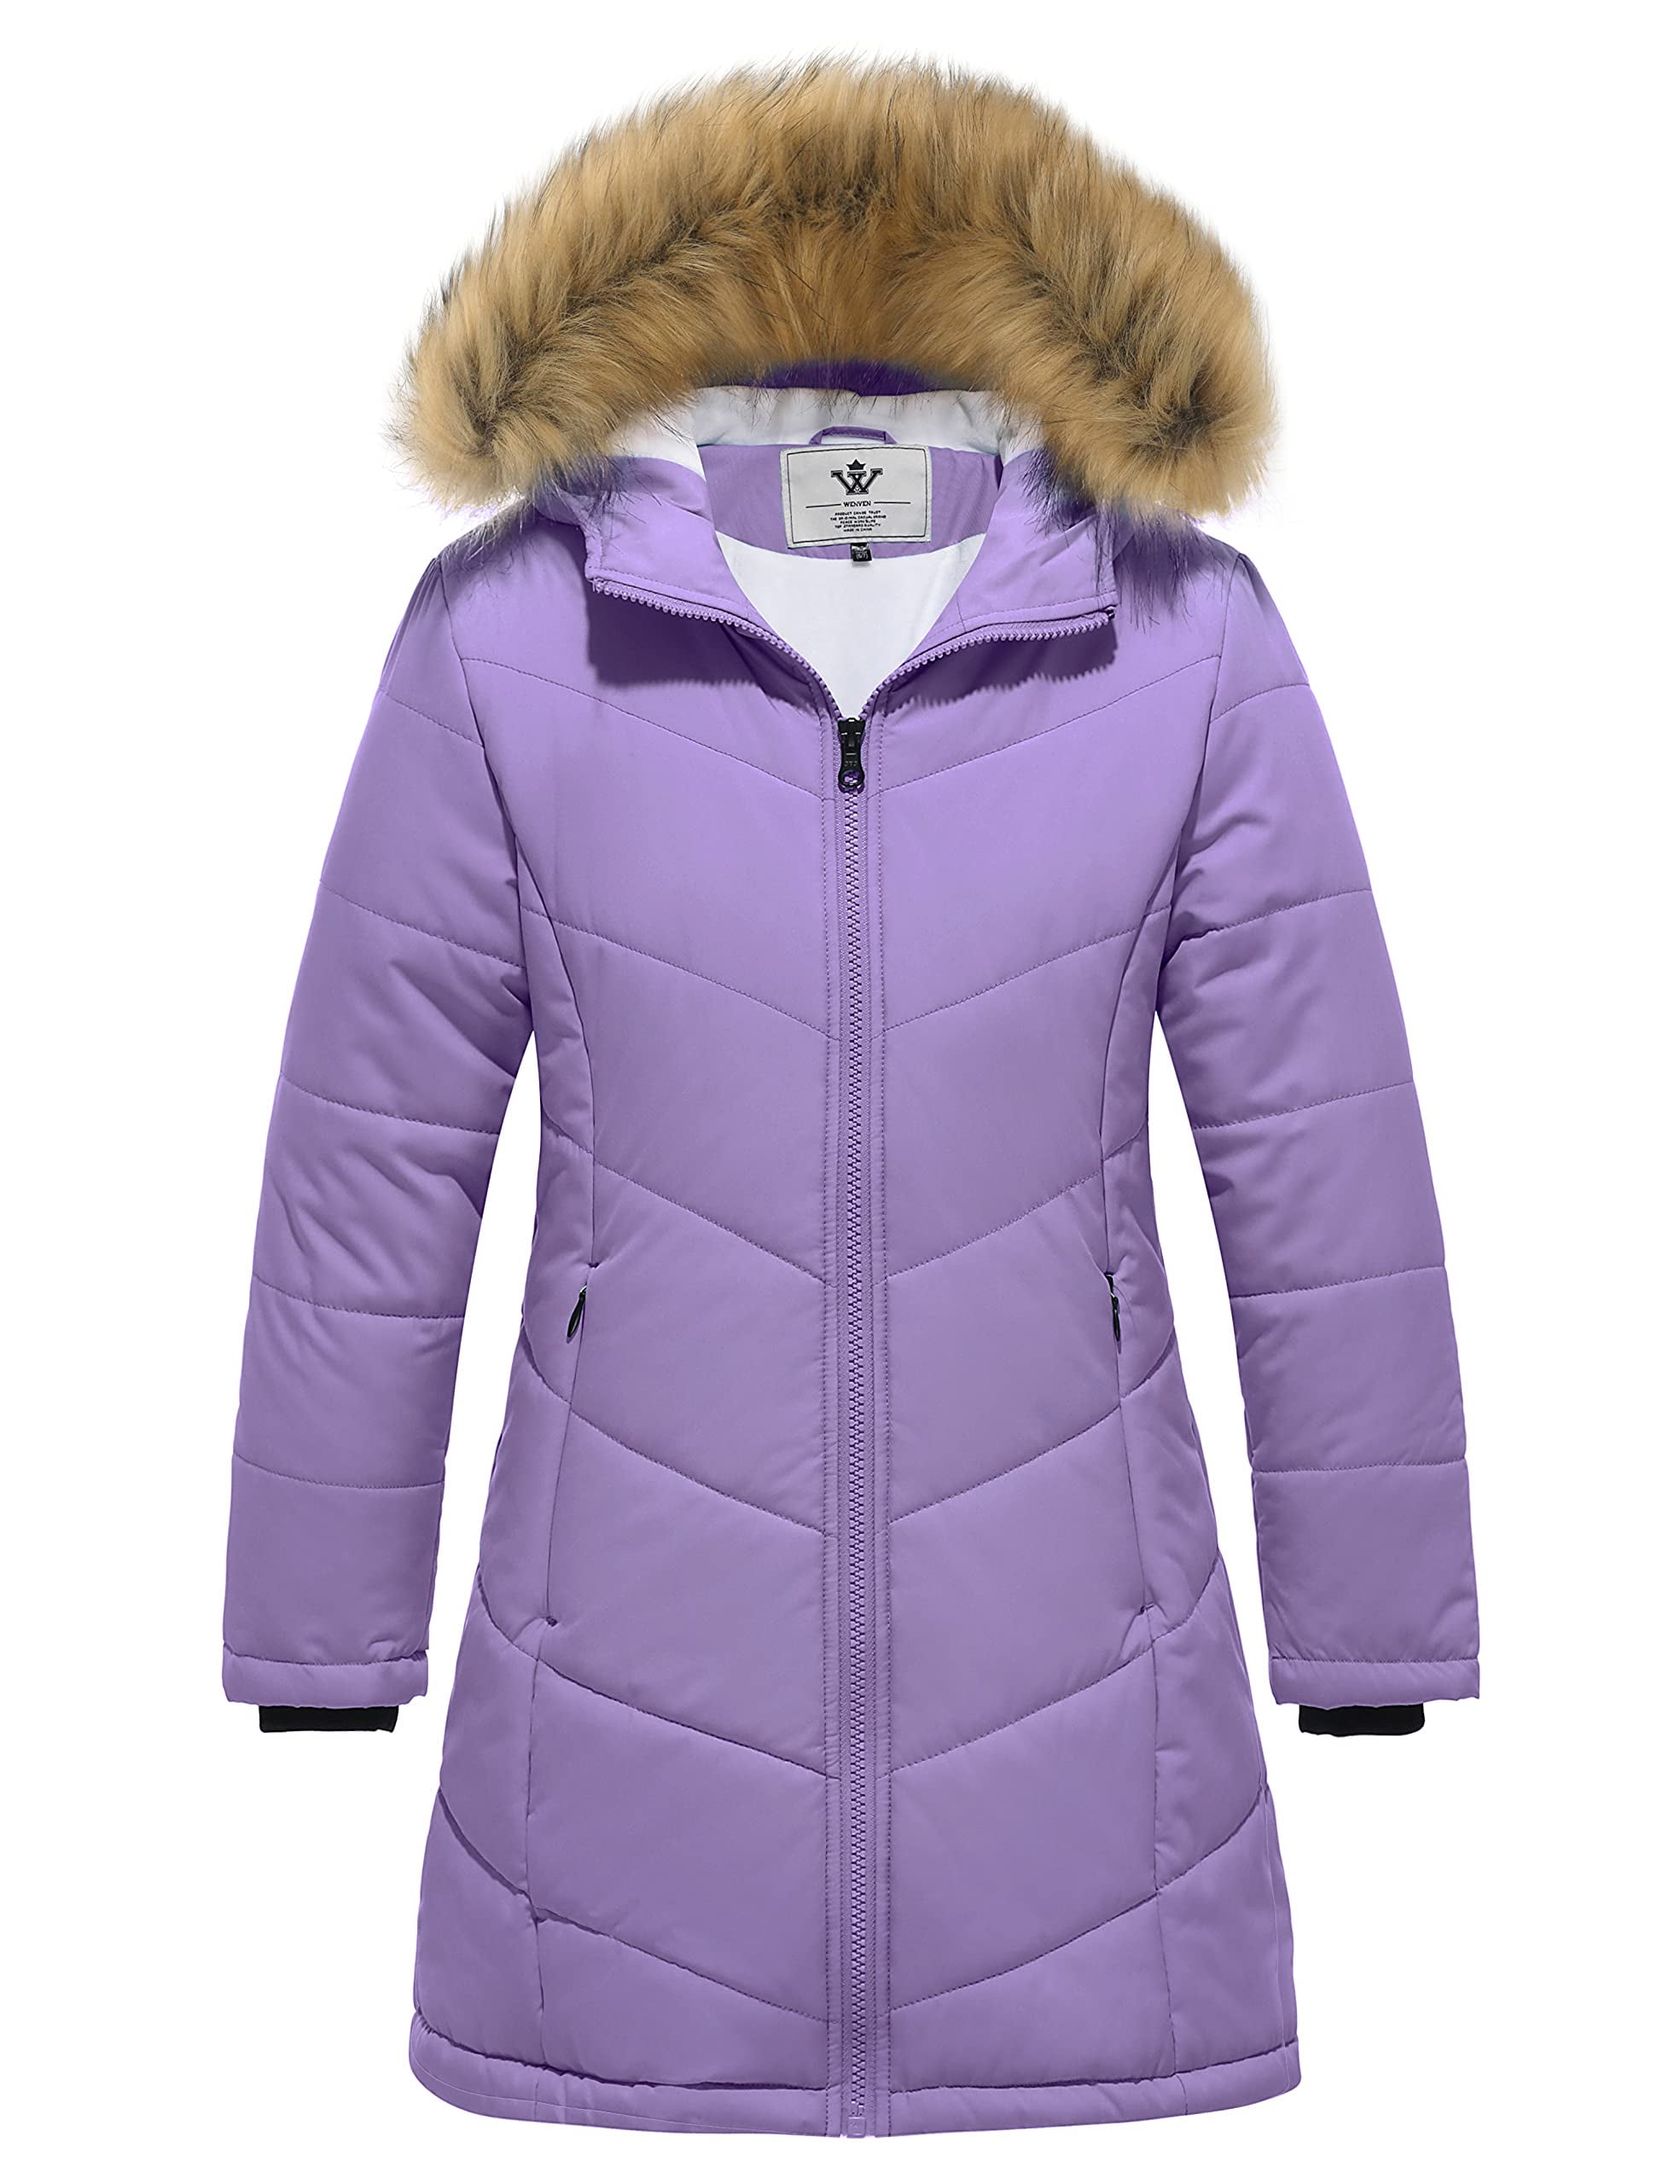 WenVen Boy's & Girl's Winter Warm Sherpa Lined Parka Coat with Removable Hood